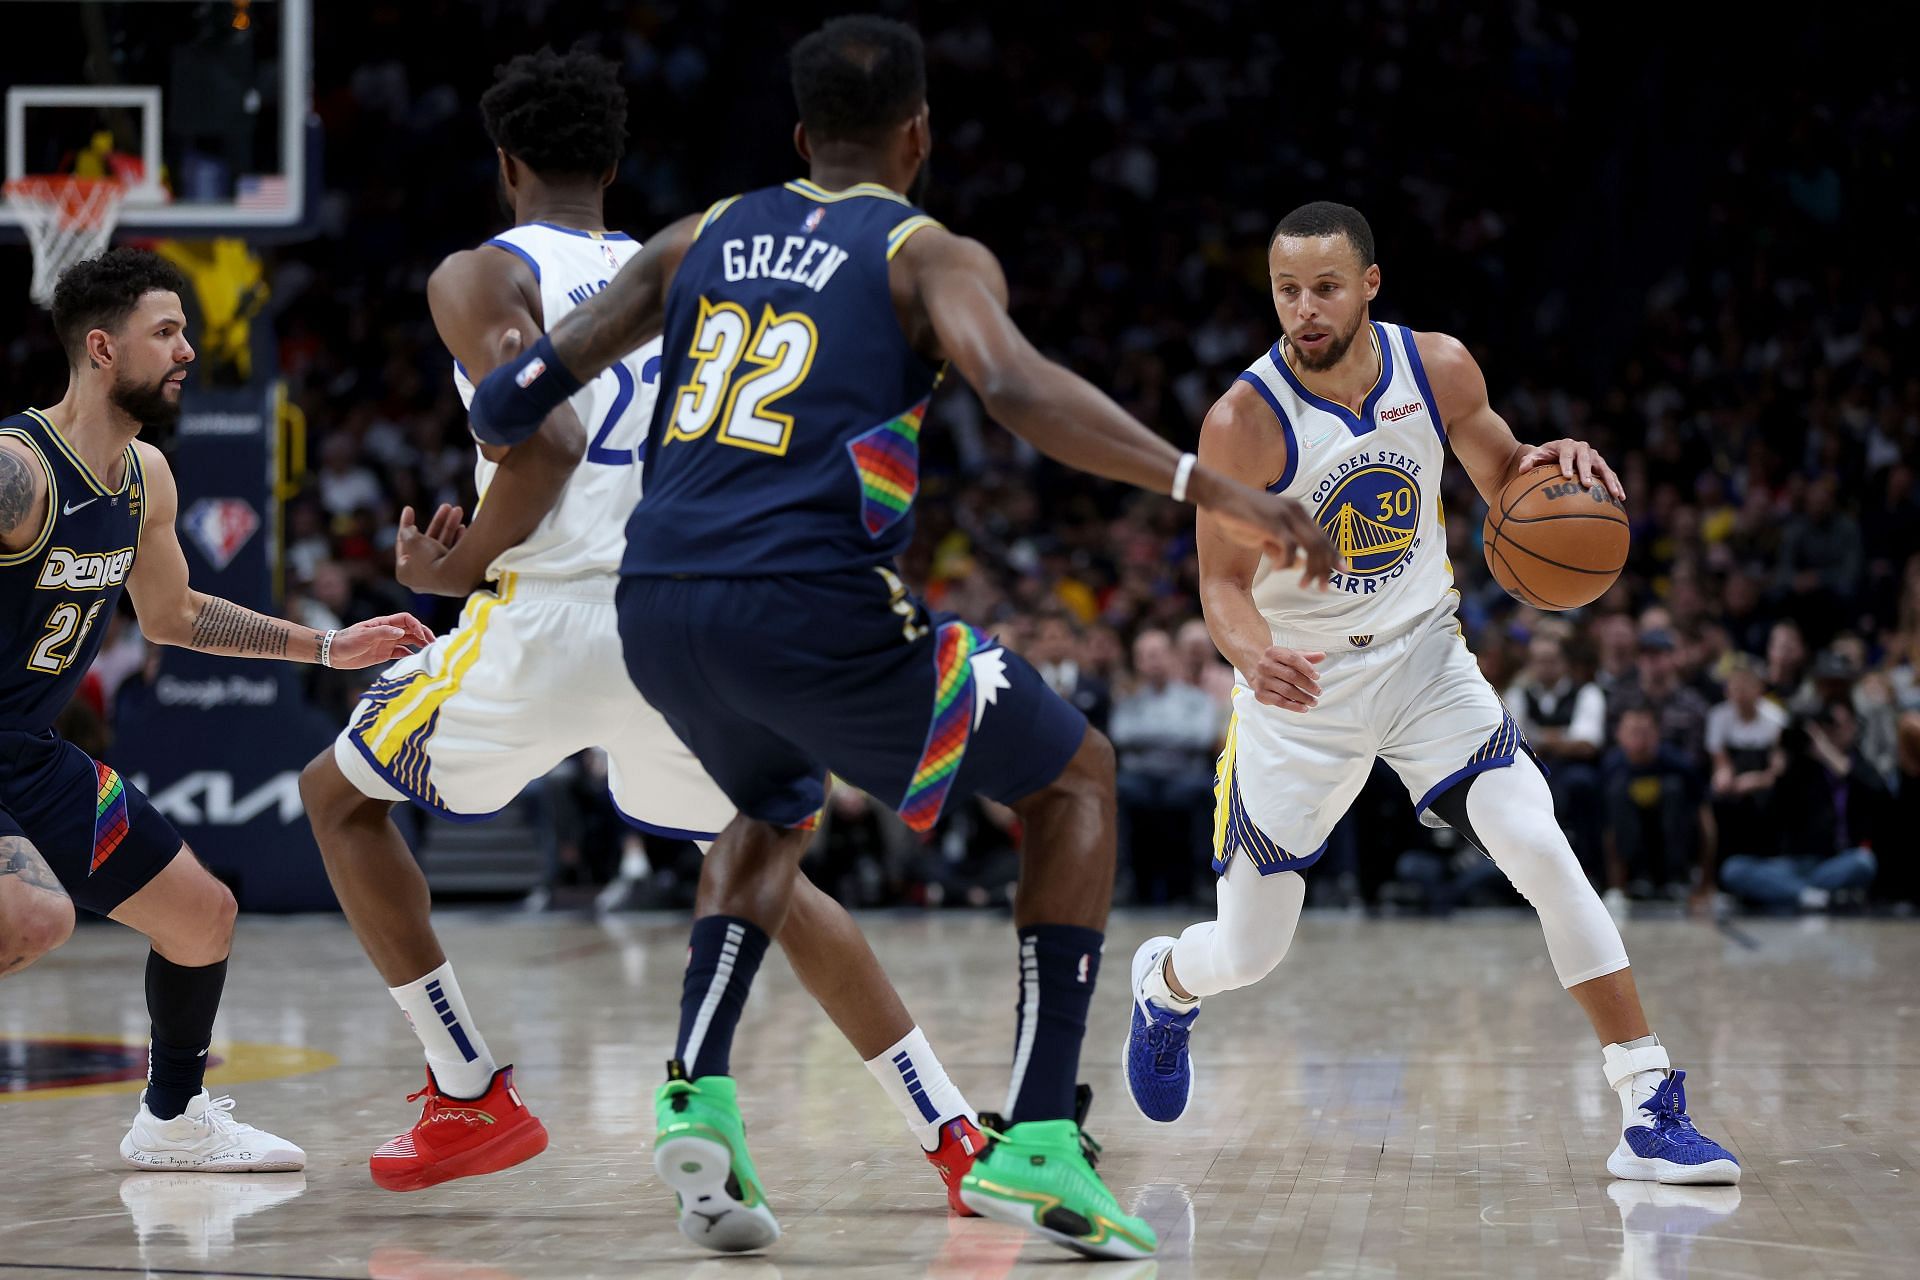 The Golden State Warriors will host the Denver Nuggets for Game 5 on April 27th